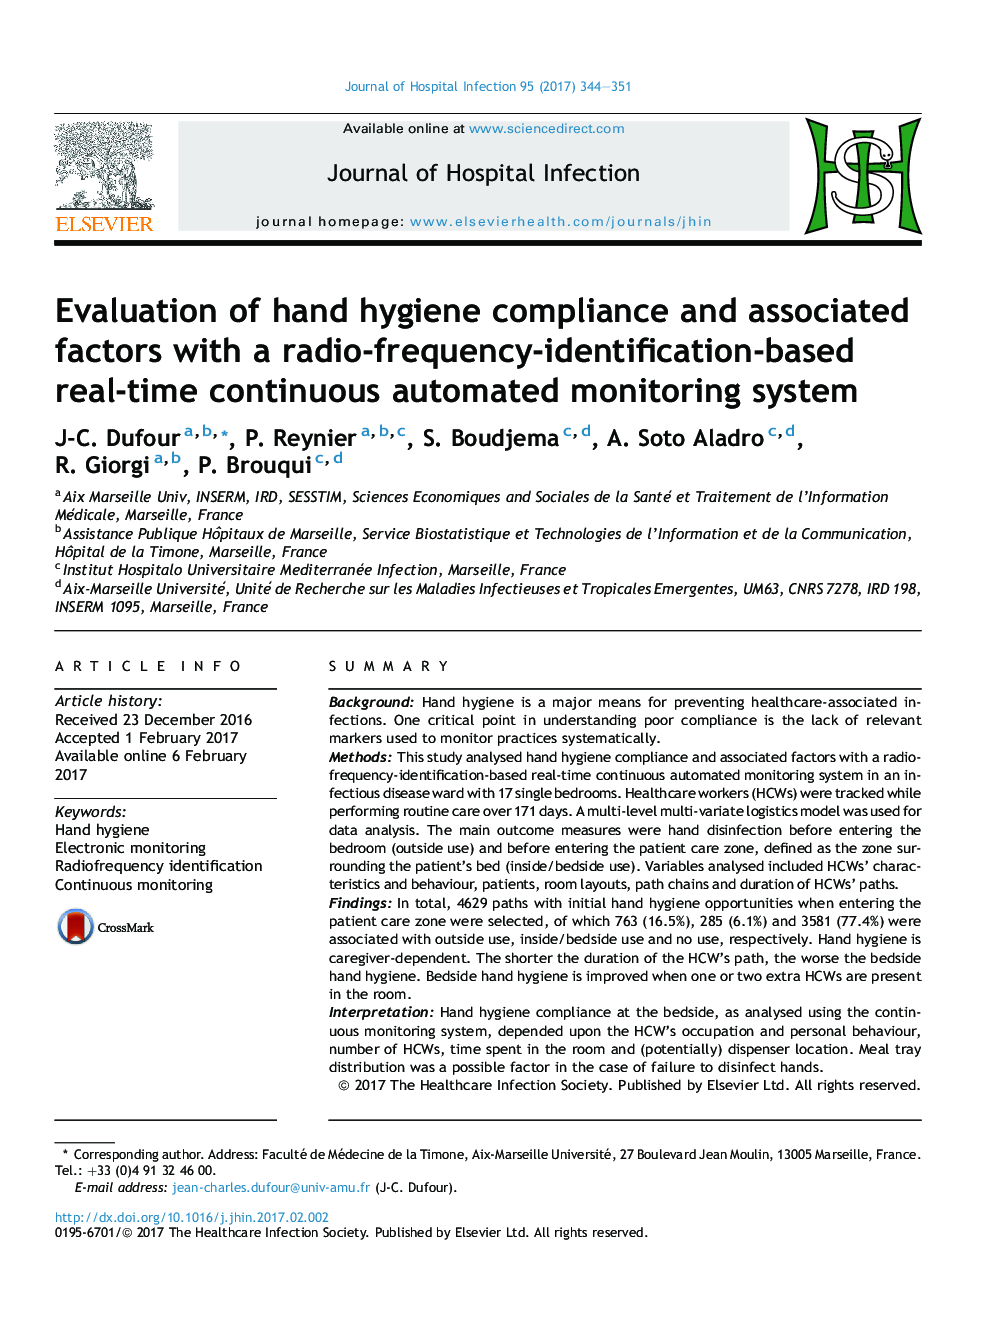 Evaluation of hand hygiene compliance and associated factors with a radio-frequency-identification-based real-time continuous automated monitoring system